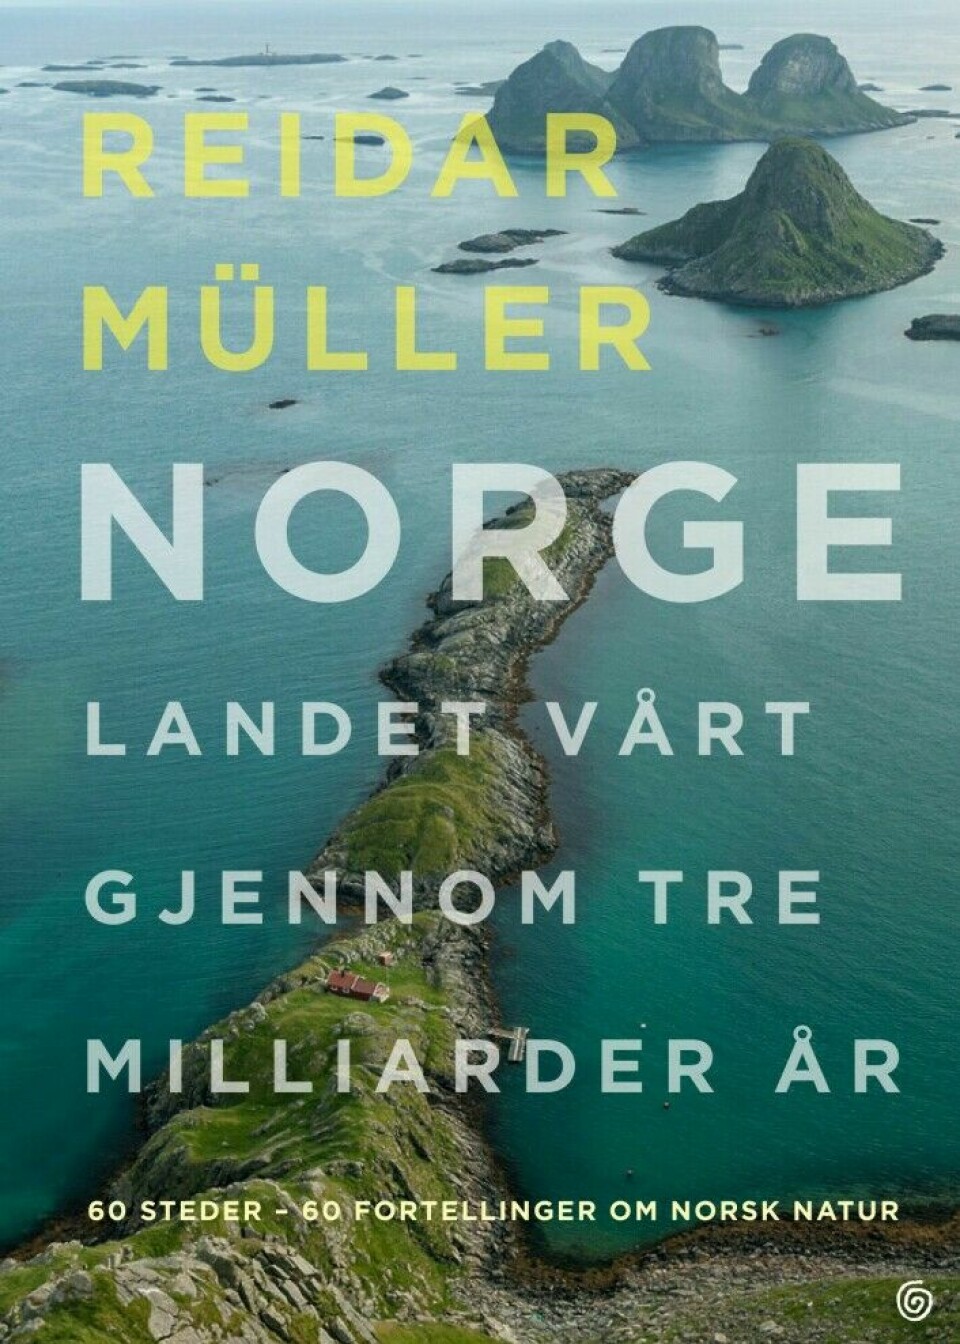 Reidar Müller has recently published a book about events in Norway that have shaped the country over three billion years.